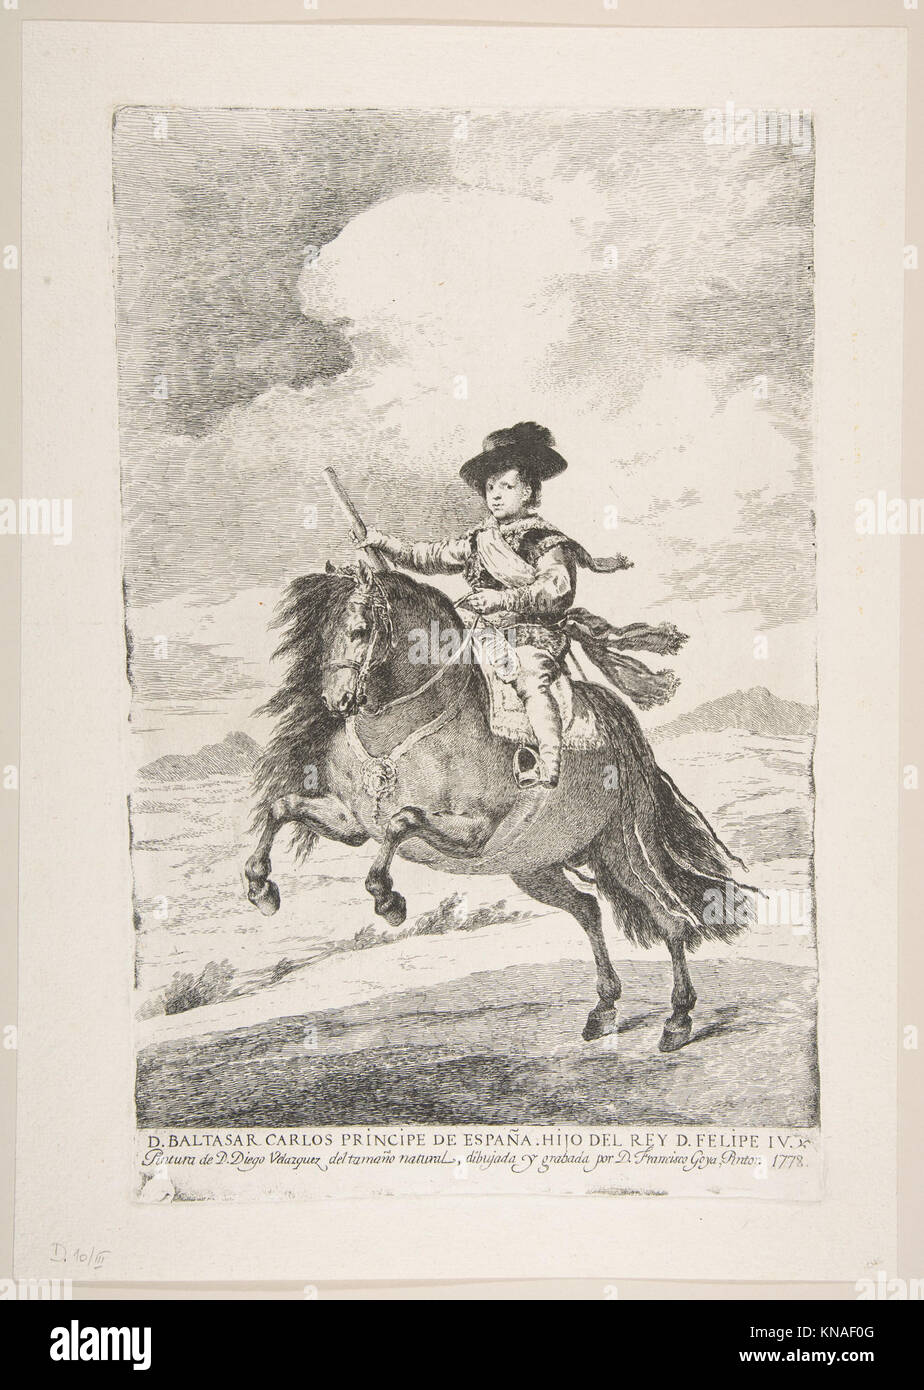 Balthasar Carlos, Prince of Spain and Son of Philip IV (D. Baltasar Carlos Principe de España. Hijo del Rey D. Felipe IV), from Etchings after Velazquez MET DP816873 Goya (Francisco de Goya y Lucientes) (Spanish, Fuendetodos 1746–1828 Bordeaux) Balthasar Carlos, Prince of Spain and Son of Philip IV (D. Baltasar Carlos Principe de España. Hijo del Rey D. Felipe IV), from Etchings after Velazquez, 1778 Spanish,  Etching and drypoint on laid paper; plate: 13 11/16 x 8 11/16 in. (34.8 x 22 cm) sheet: 15 9/16 x 11 in. (39.6 x 28 cm) The Metropolitan Museum of Art, New York, Bequest of Grace M. Pugh Stock Photo